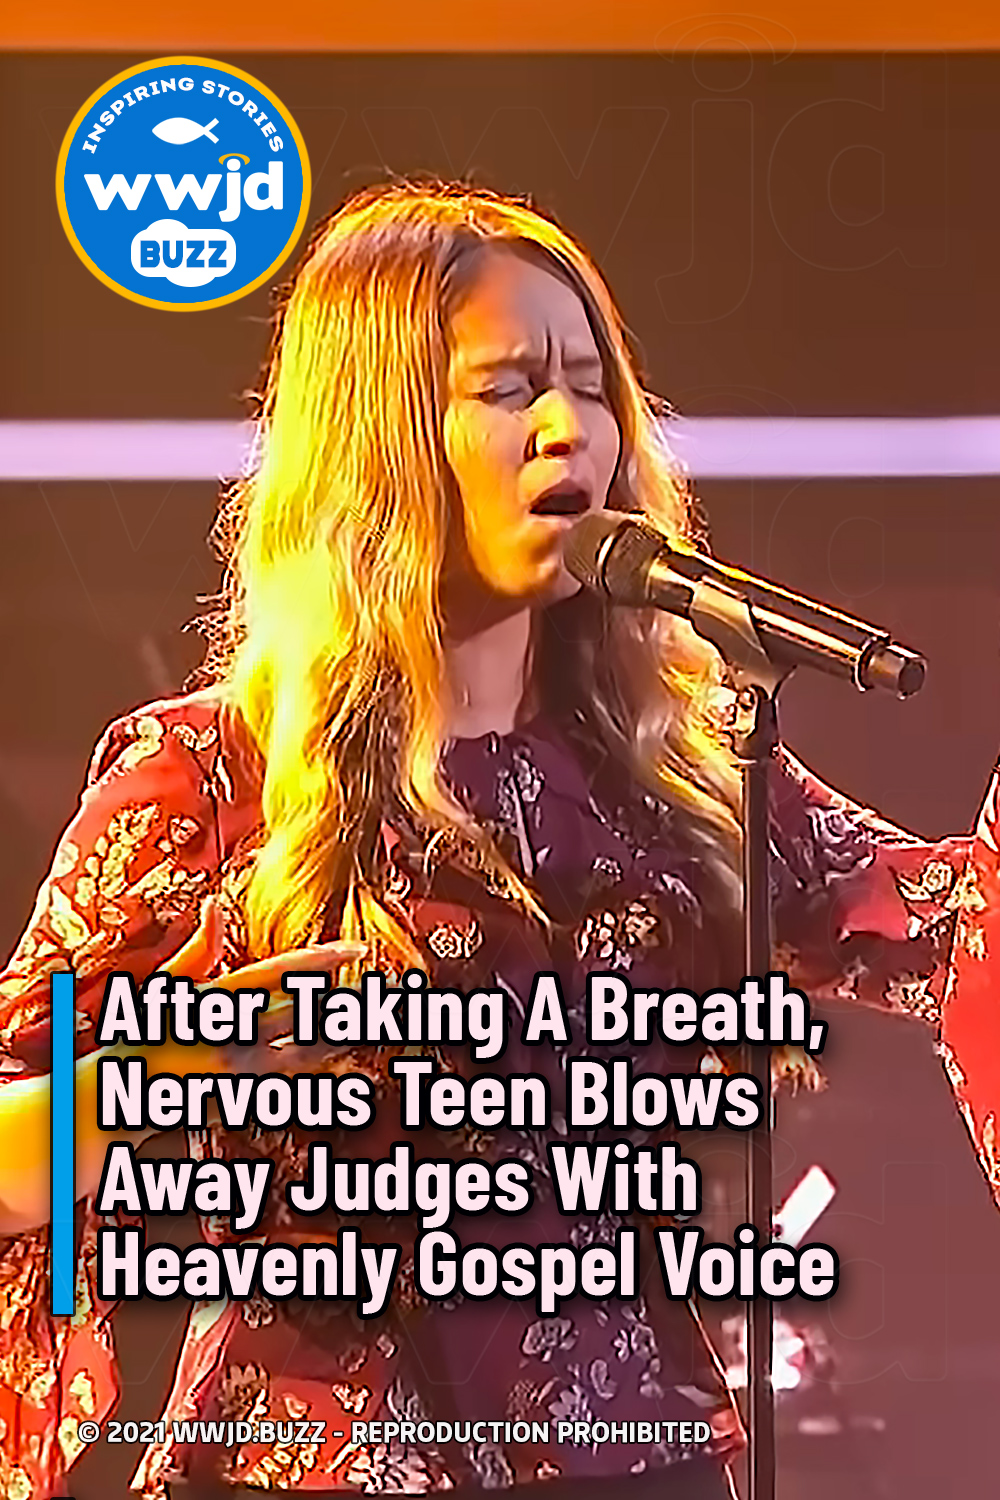 After Taking A Breath, Nervous Teen Blows Away Judges With Heavenly Gospel Voice